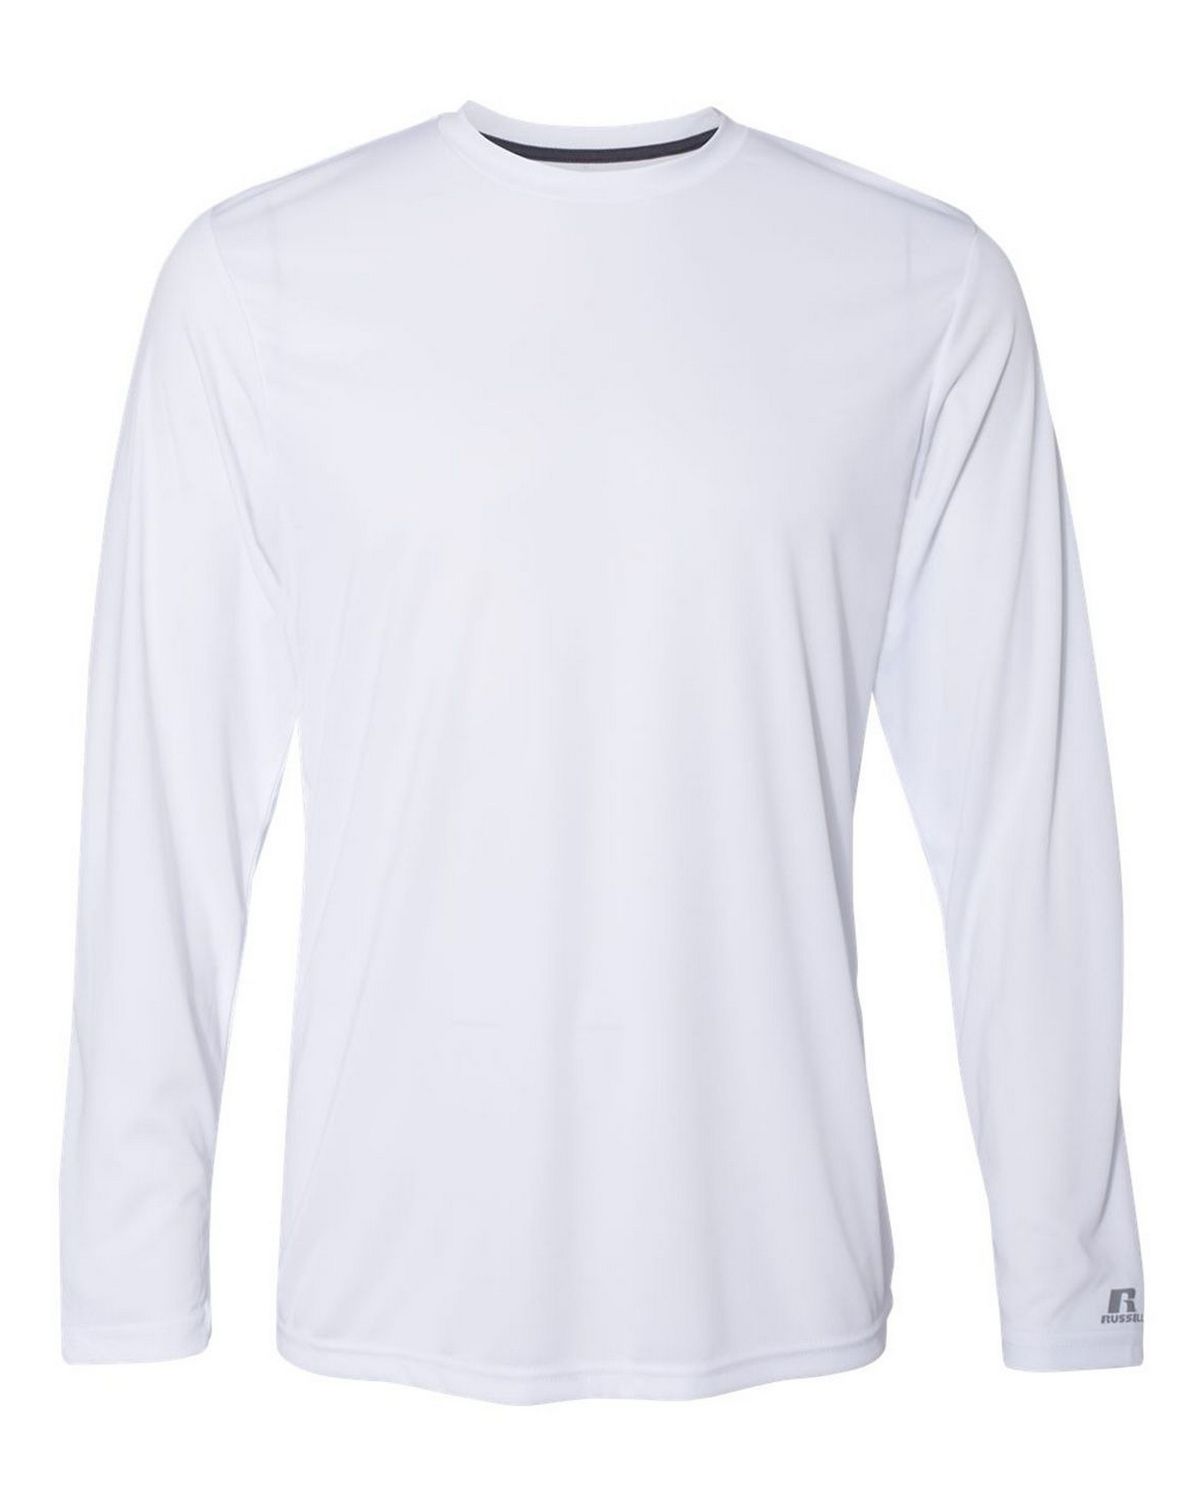 russell athletic dri power long sleeve shirts